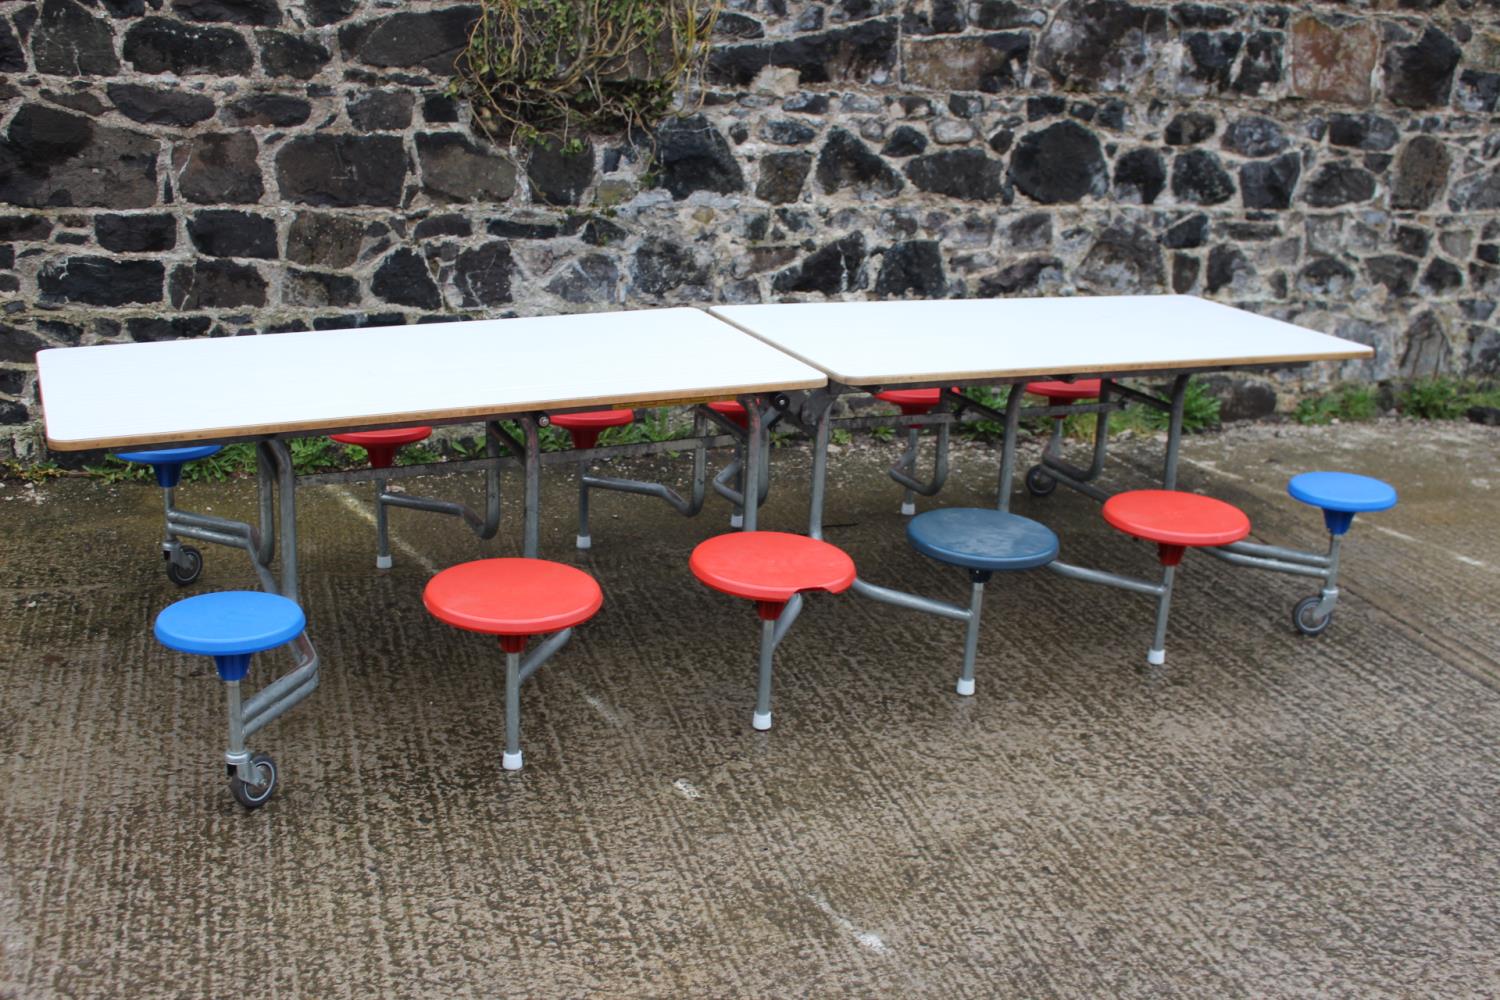 Children's two picnic table and seats